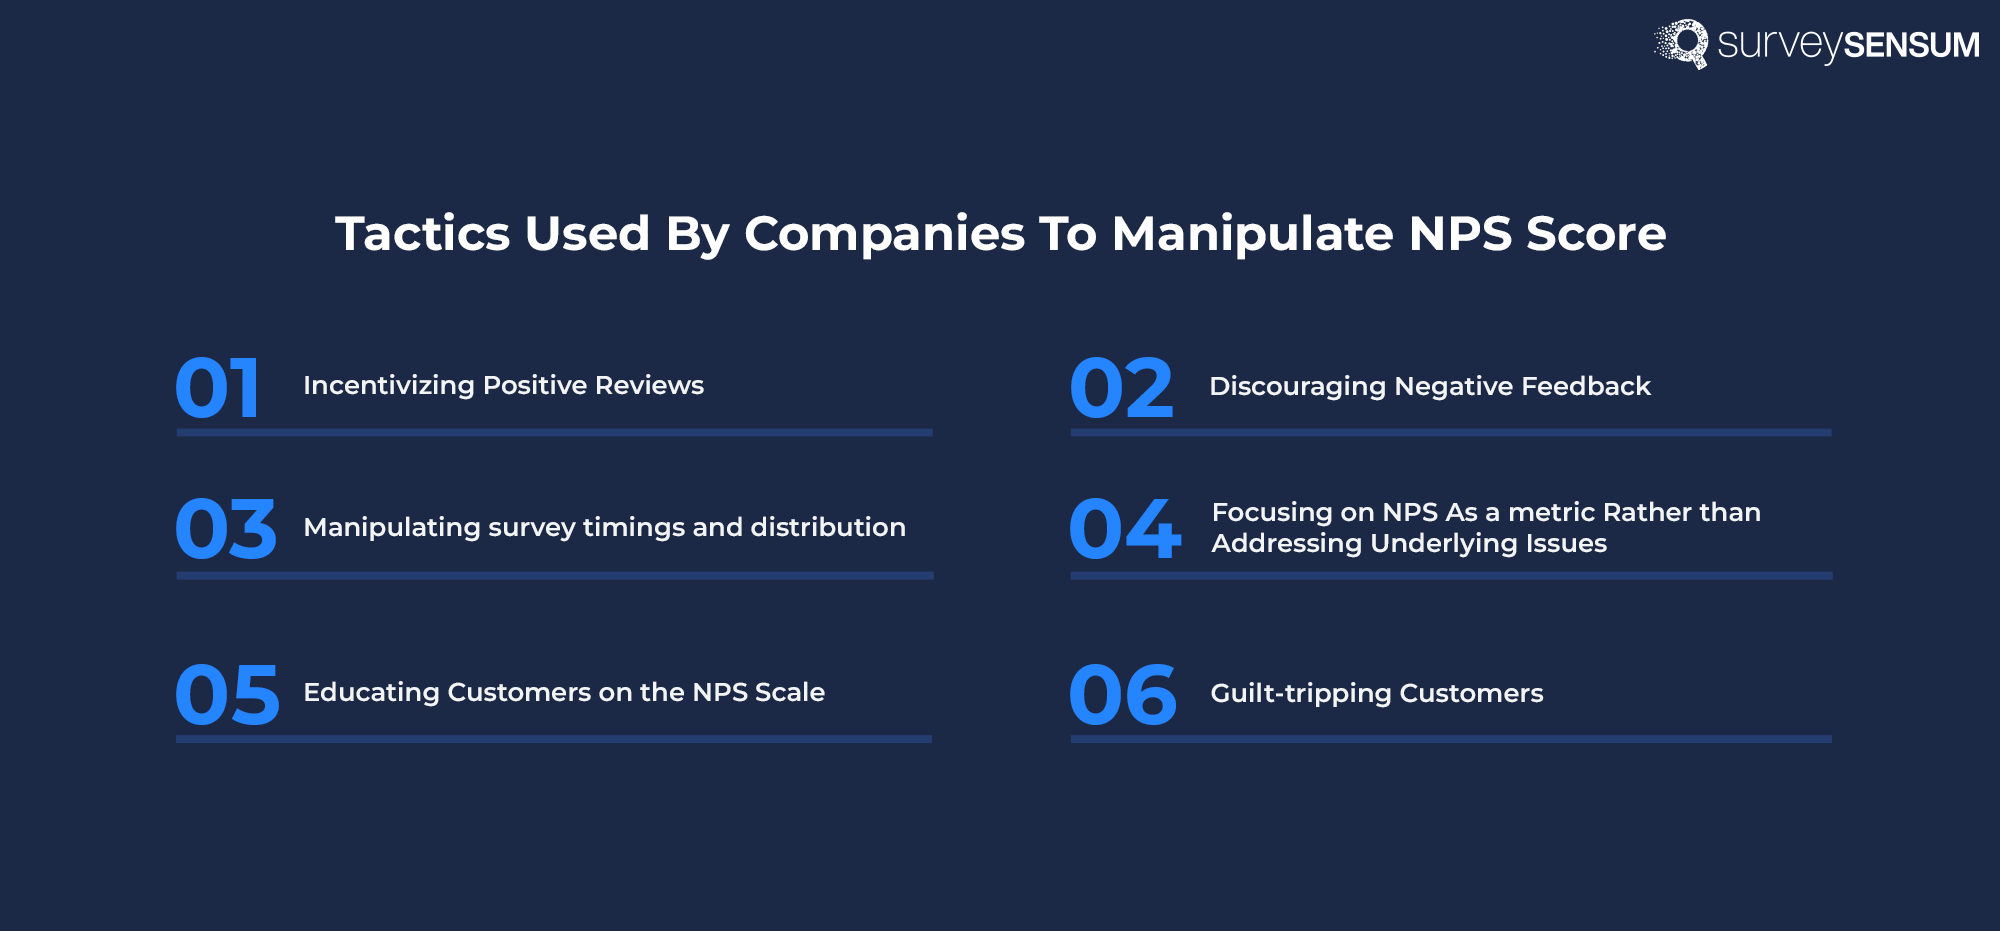 The image shows all the tactics used by companies to manipulate and game their NPS score. 